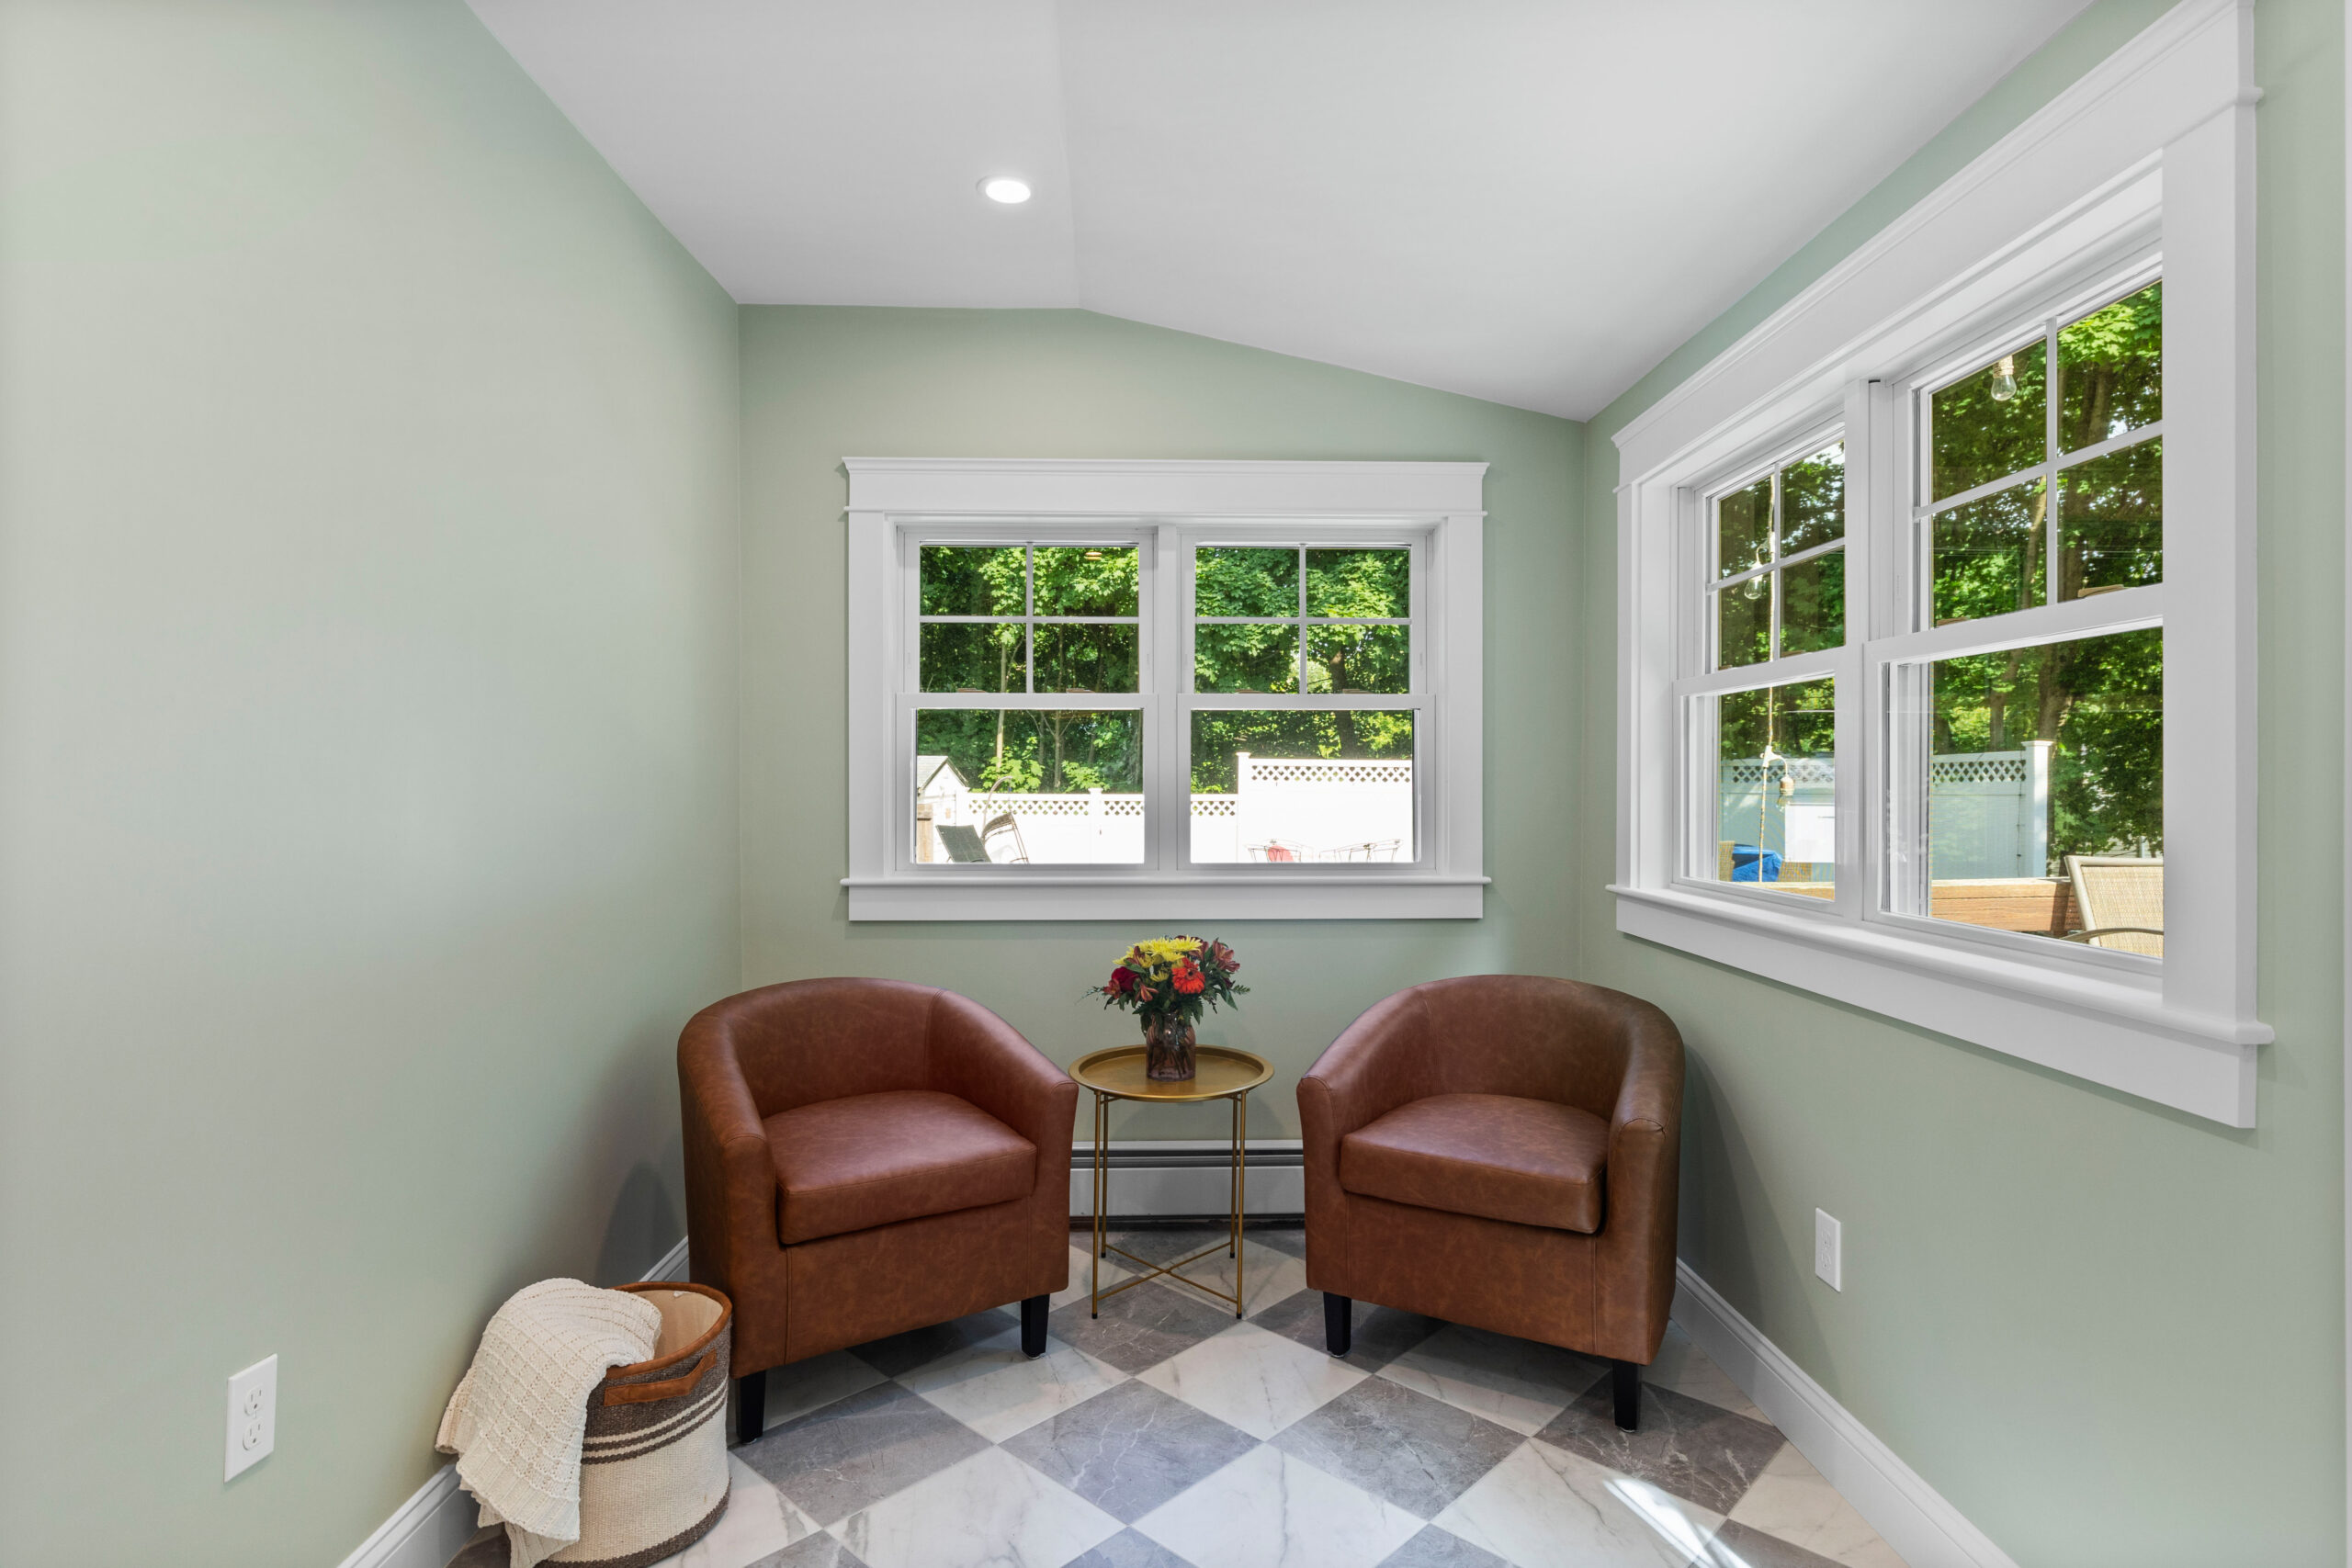 Image of a fully renovated sunroom in a vintage New England home. The sunroom features light green walls, large windows, and marble tile flooring. It is furnished with two brown leather armchairs and a small round table with a floral arrangement, providing a cozy and bright space to relax and enjoy the view of the backyard.